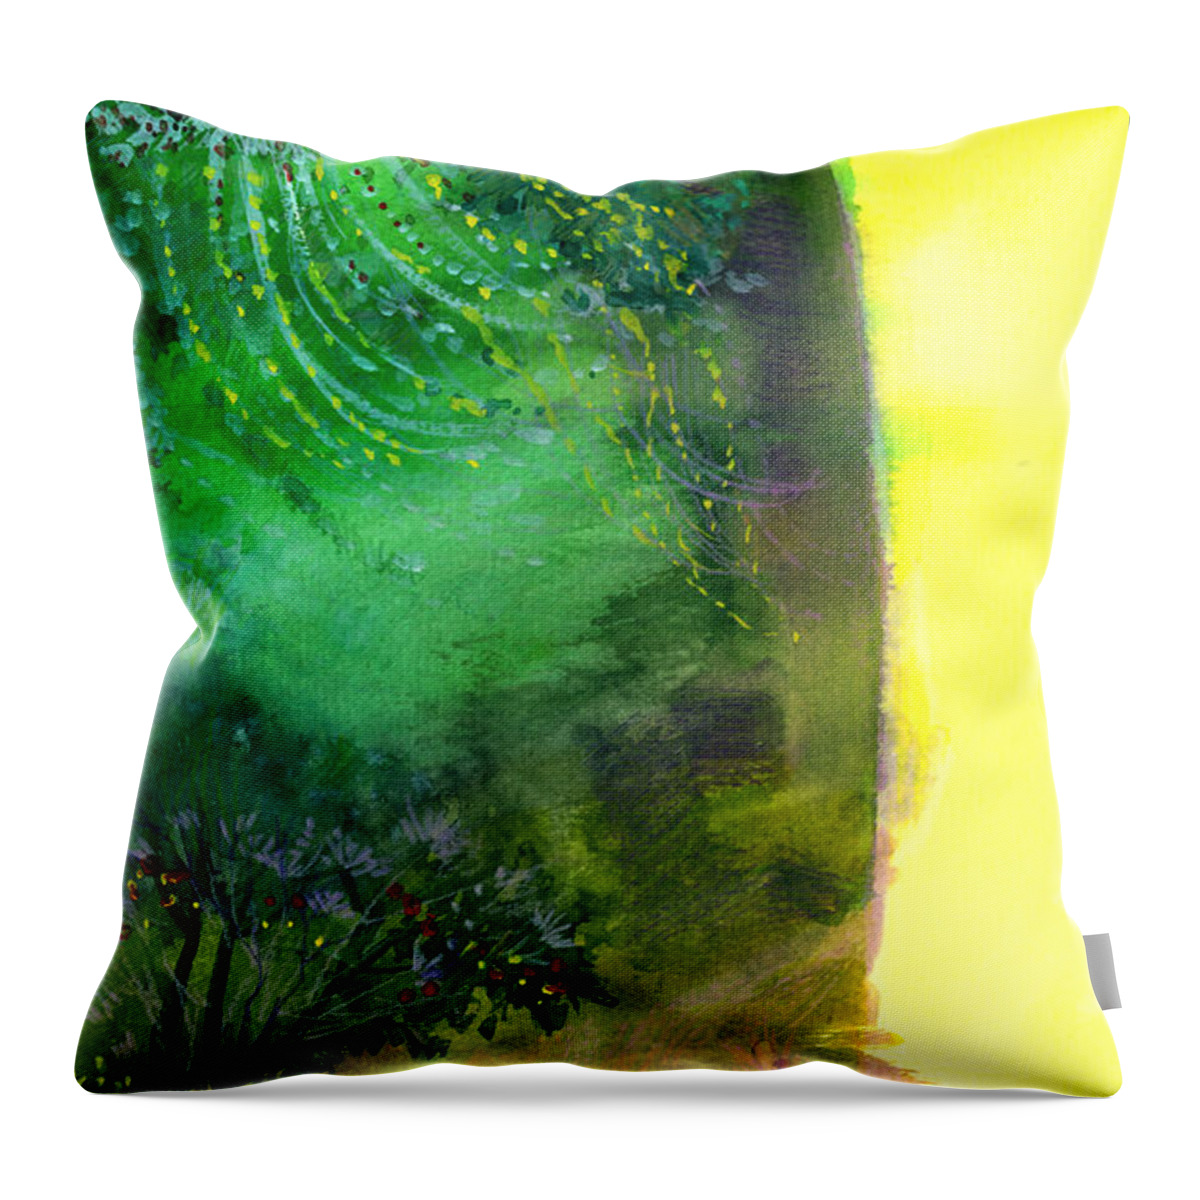 Cliff Throw Pillow featuring the painting Cliff by Anil Nene